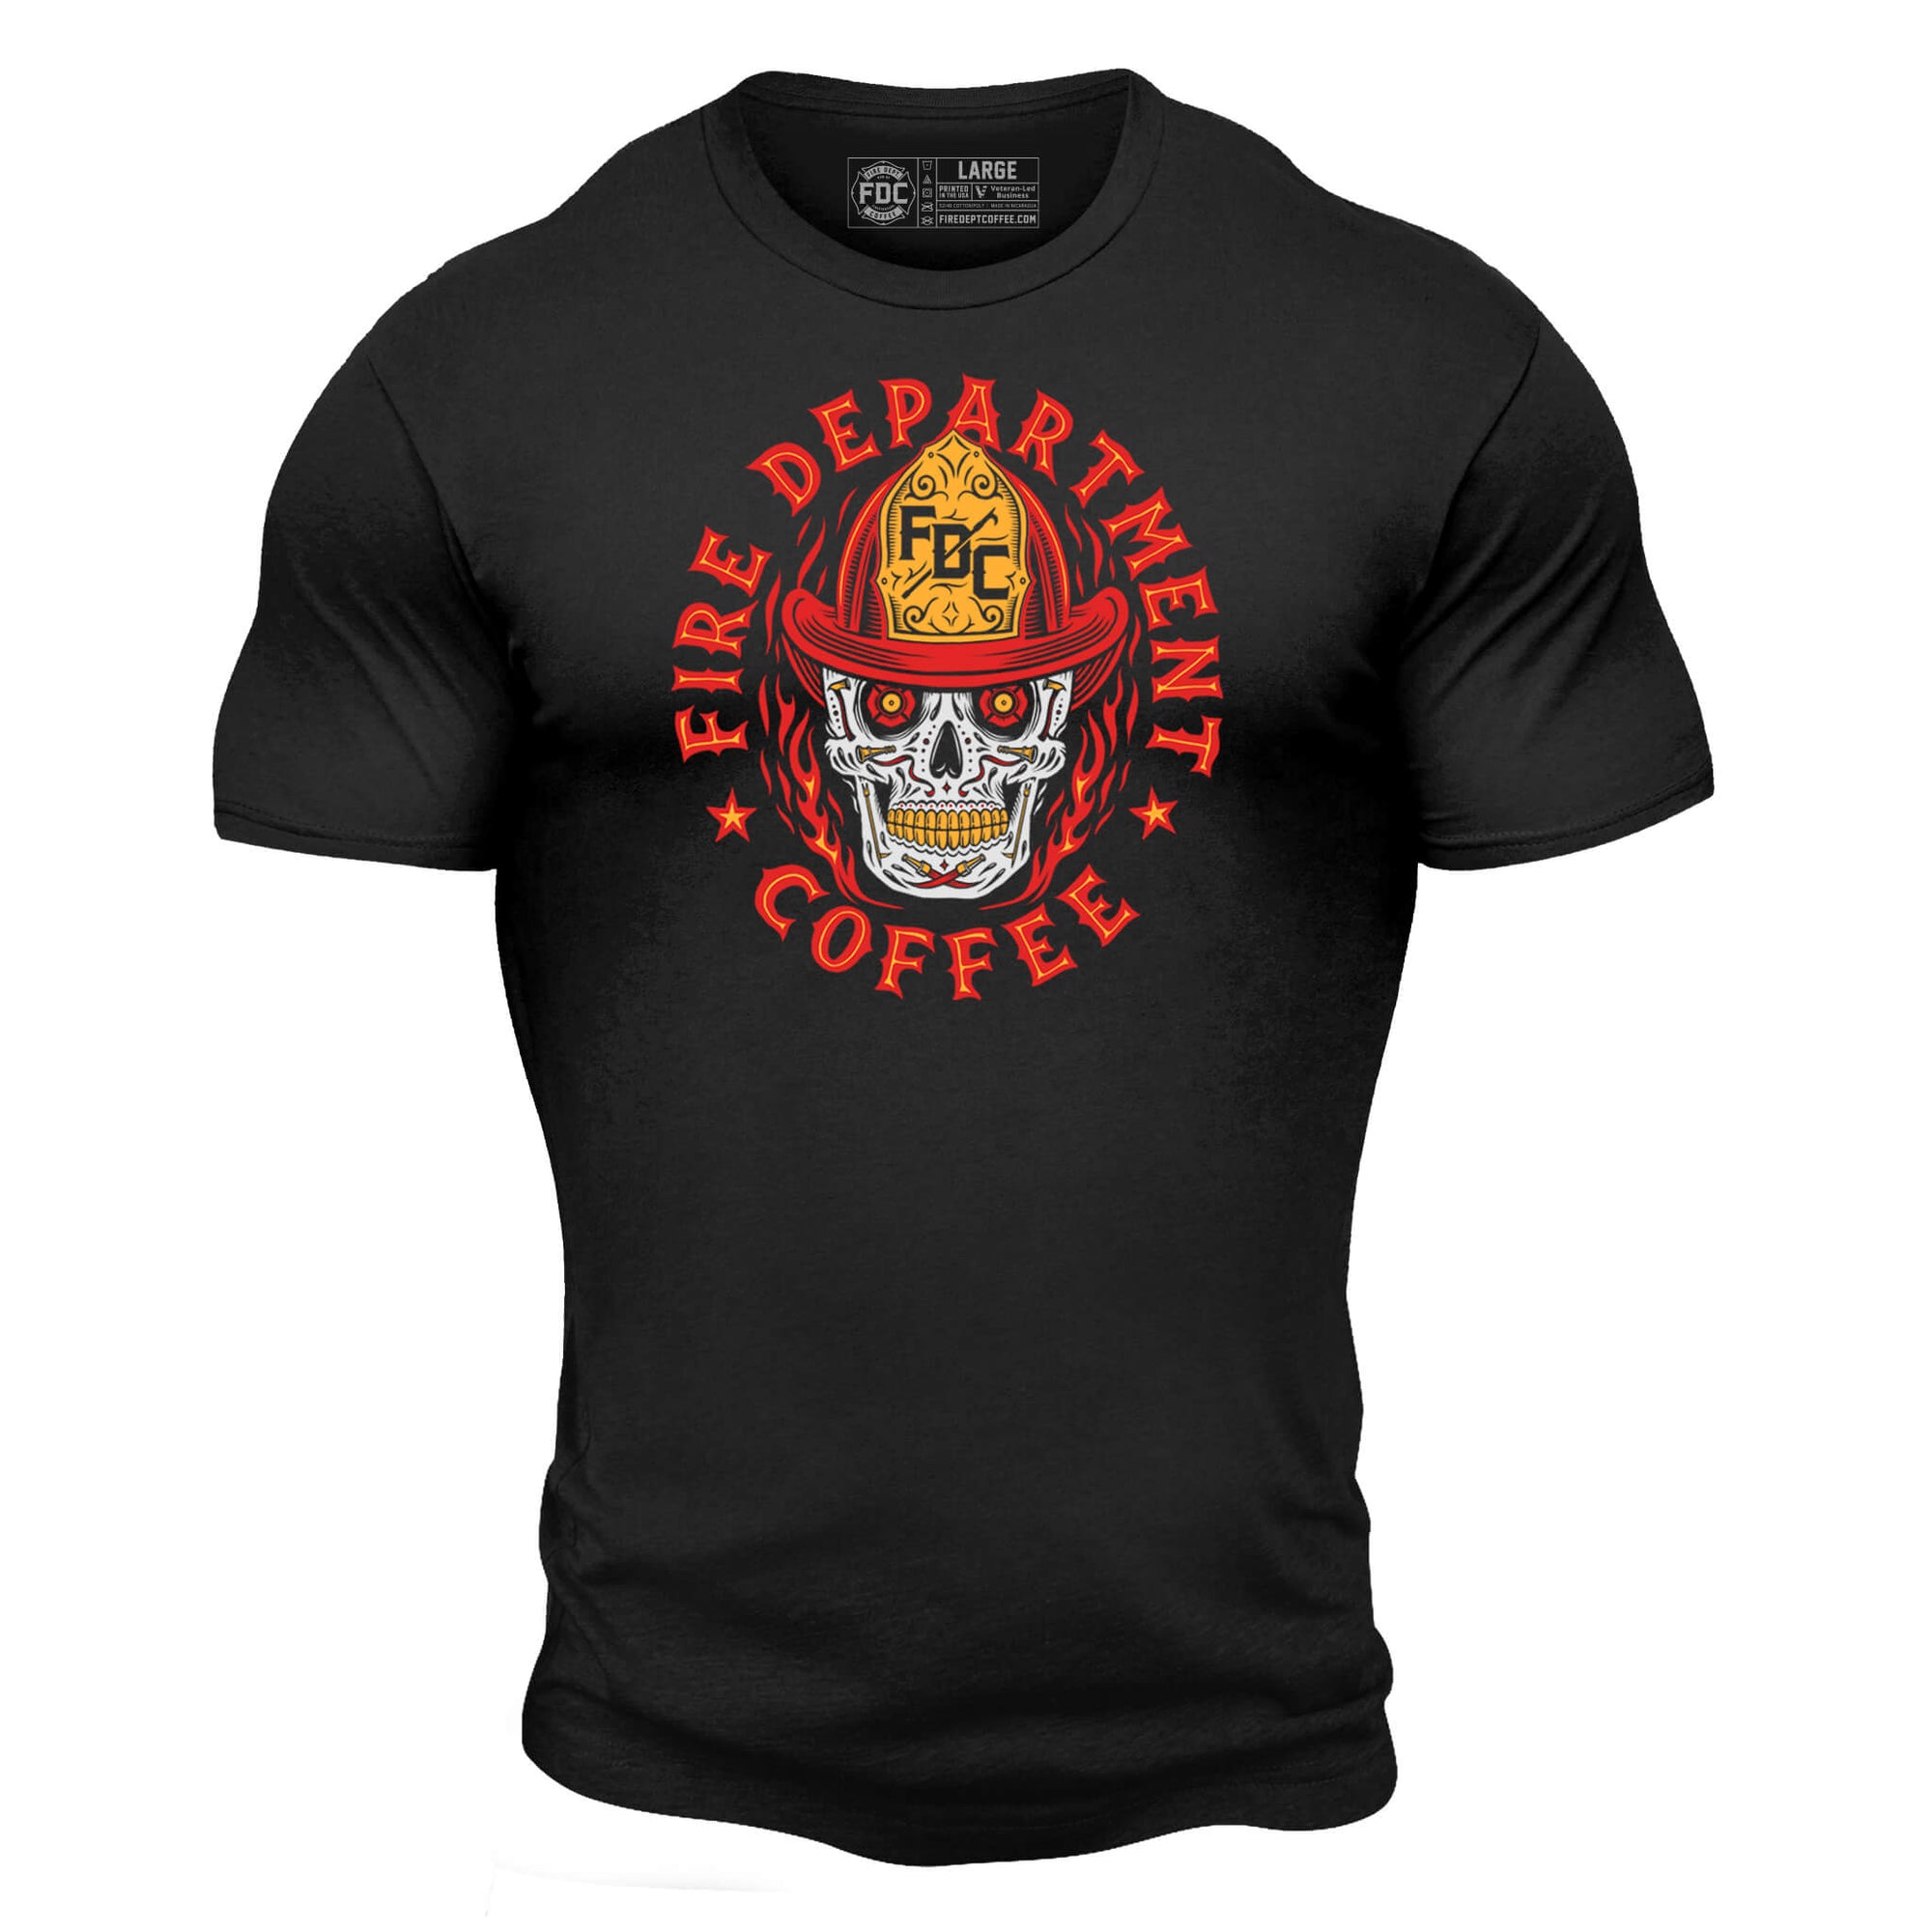 A black t shirt with a skull wearing an FDC fire helmet surrounded by flames in the center. Around the skull is text that reads "Fire Department Coffee".